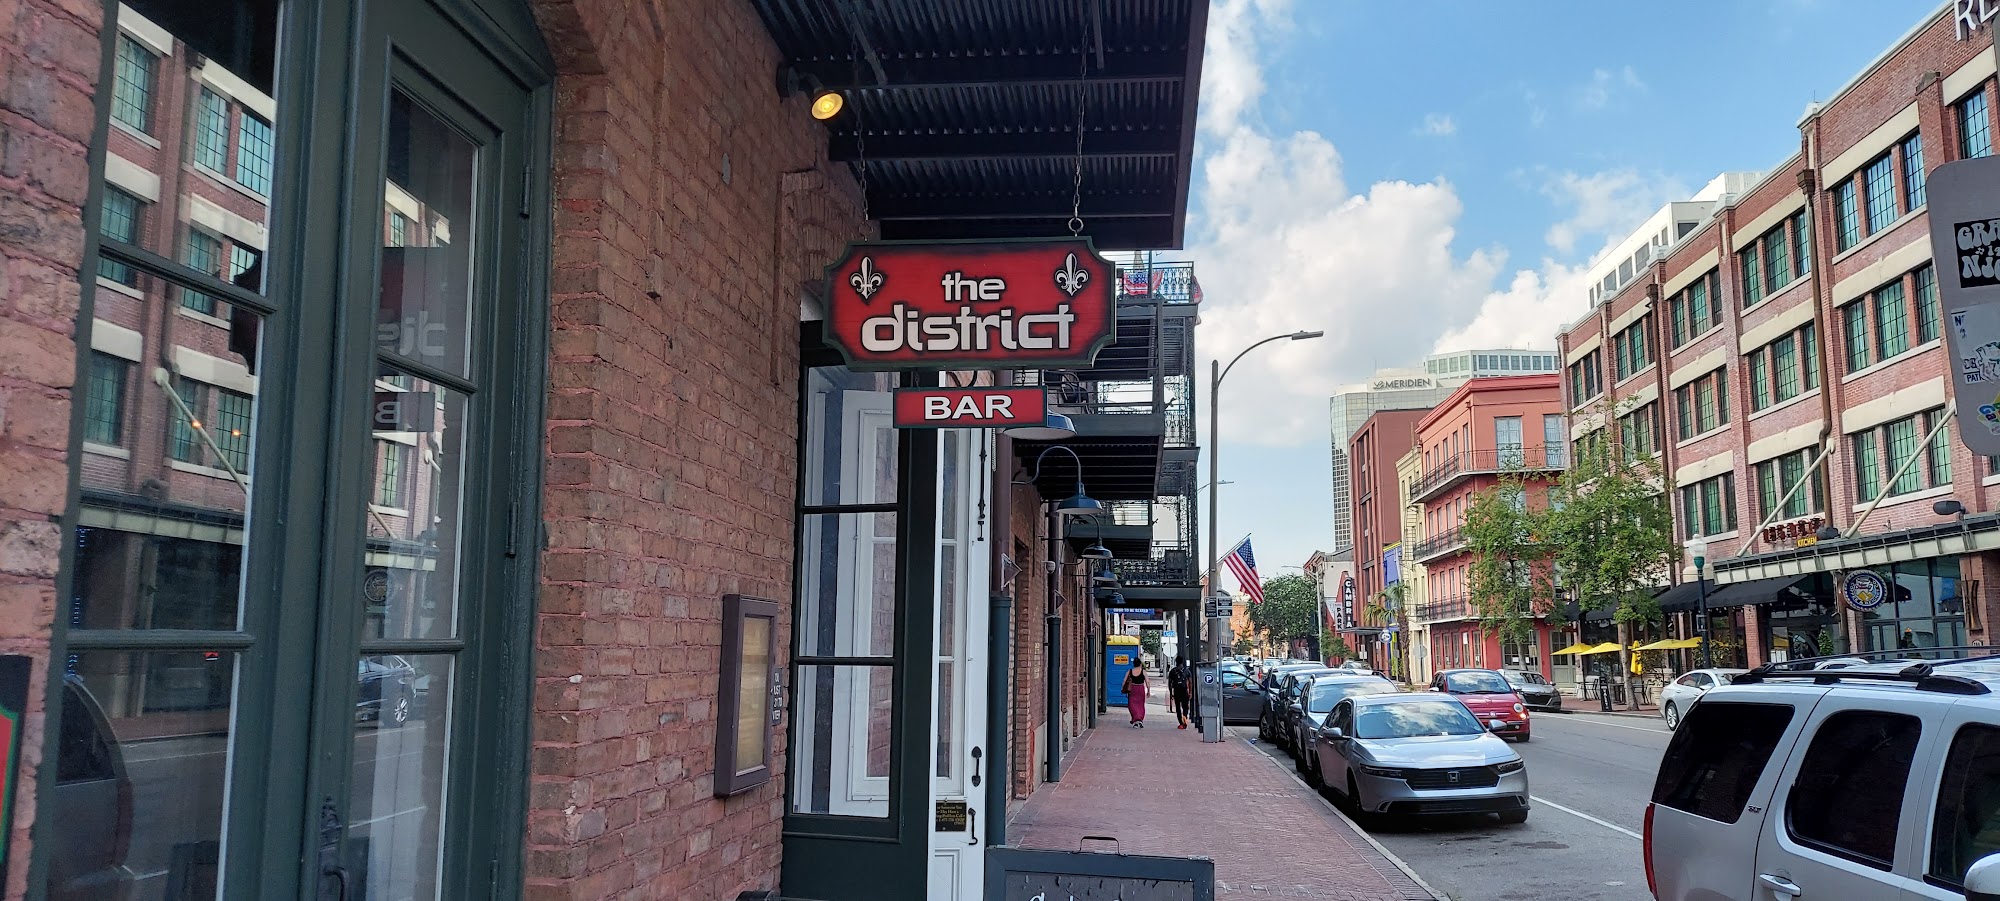 The District Lounge